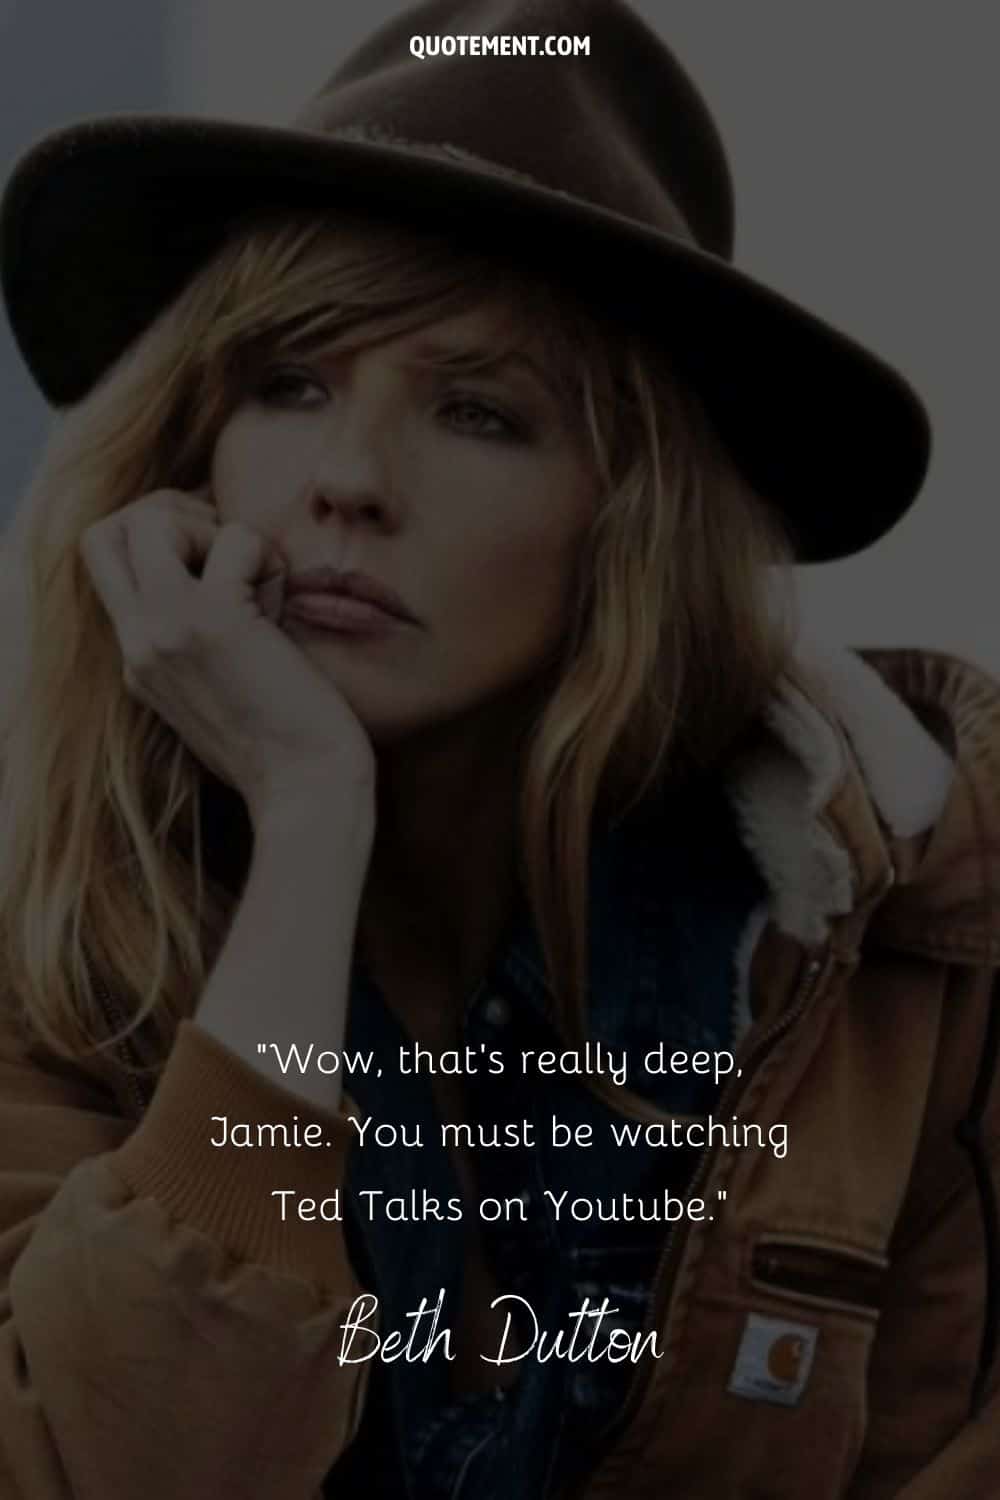 Beth Dutton's image representing a sarcastic quote by Beth Dutton